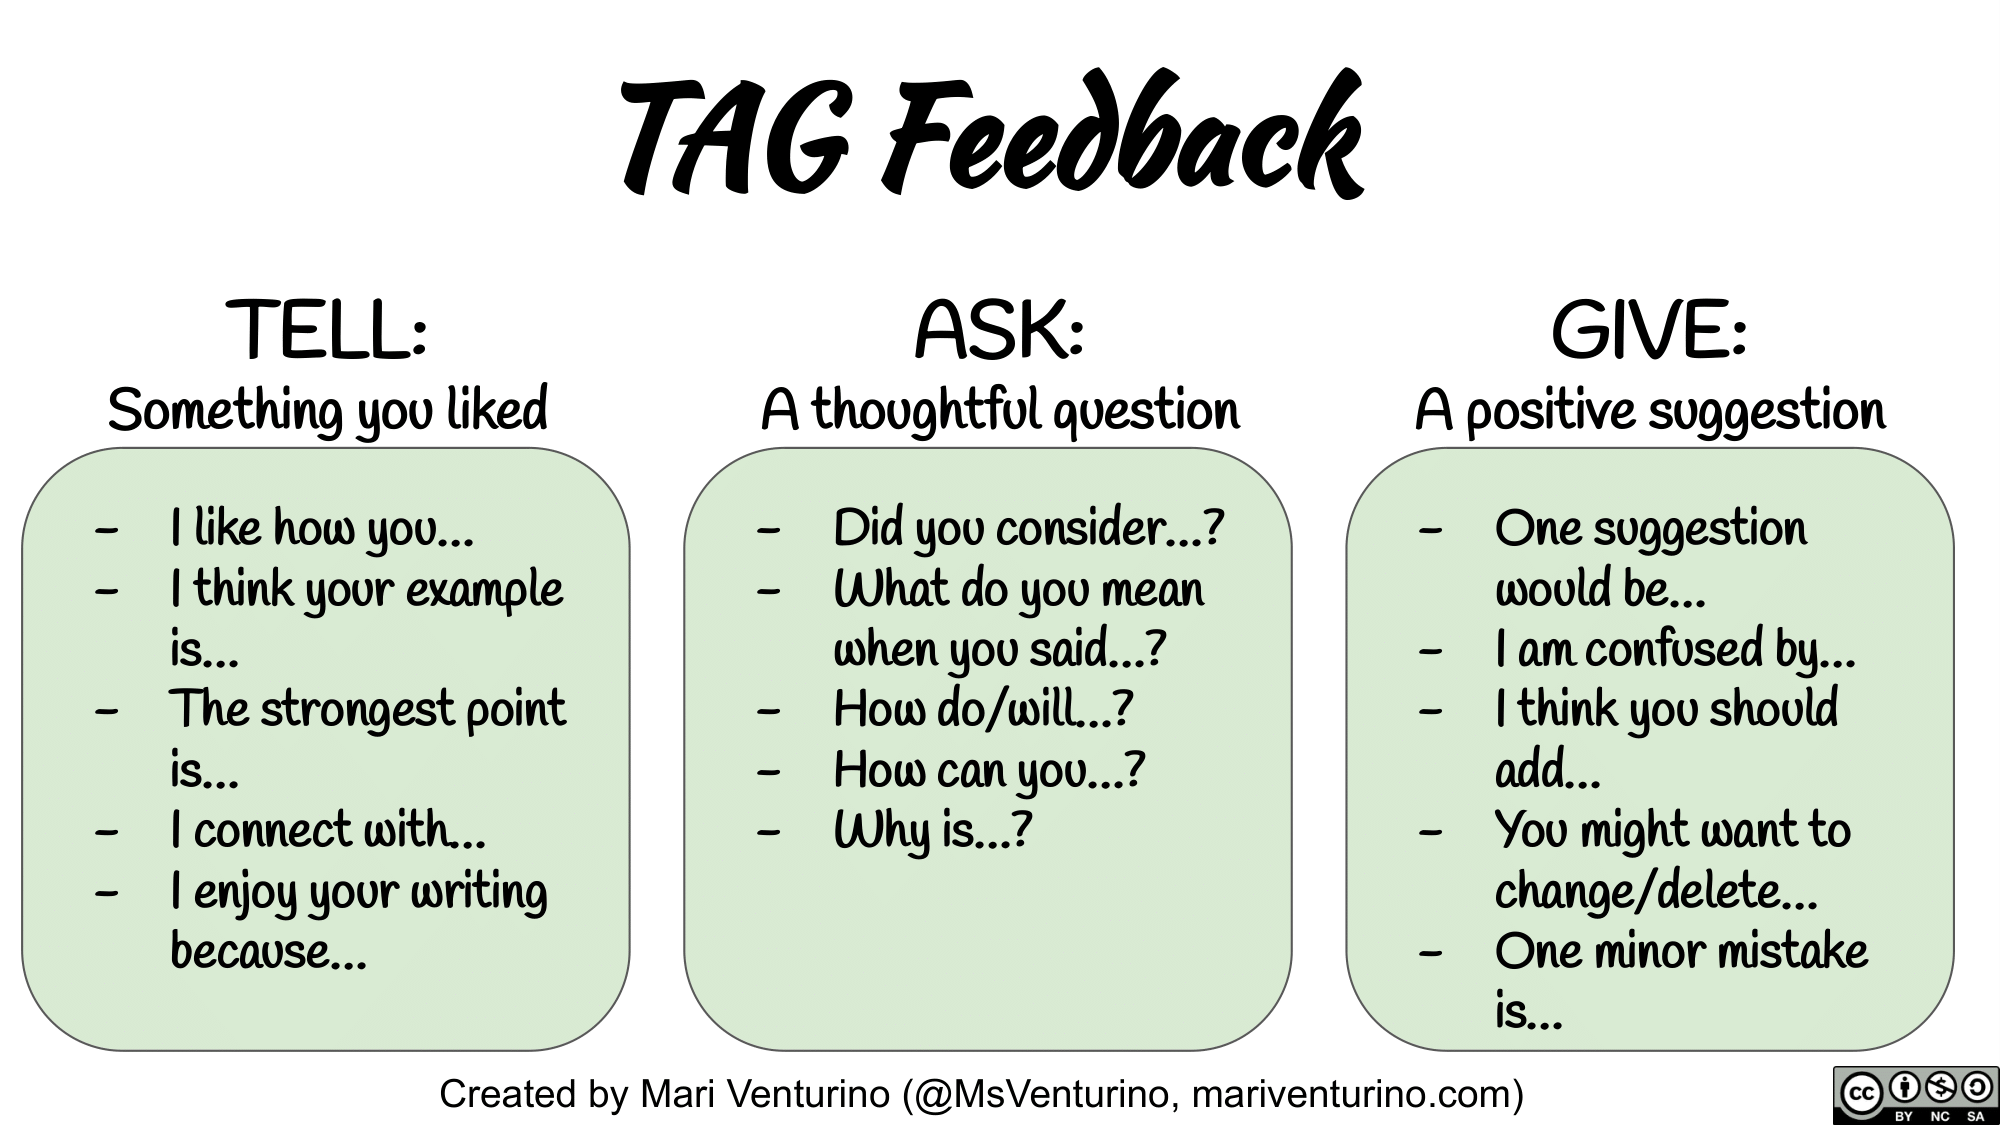 Visual showing components of TAG feedback